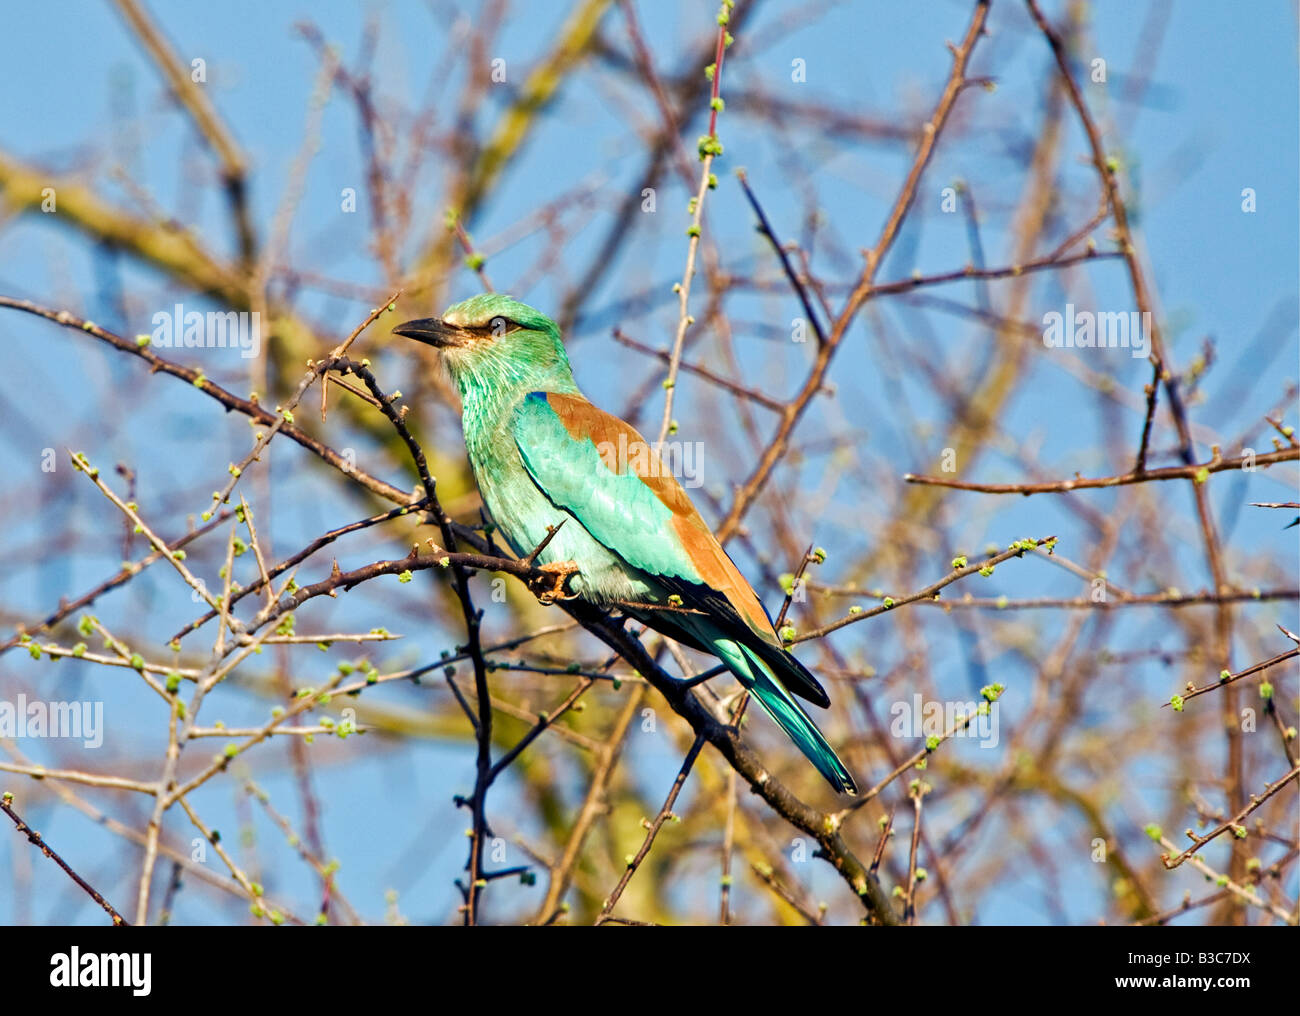 Kenya, Tsavo East National Park. An European Roller (Coracias garrulous), a common Palearctic visitor in East Africa from October to April. Stock Photo